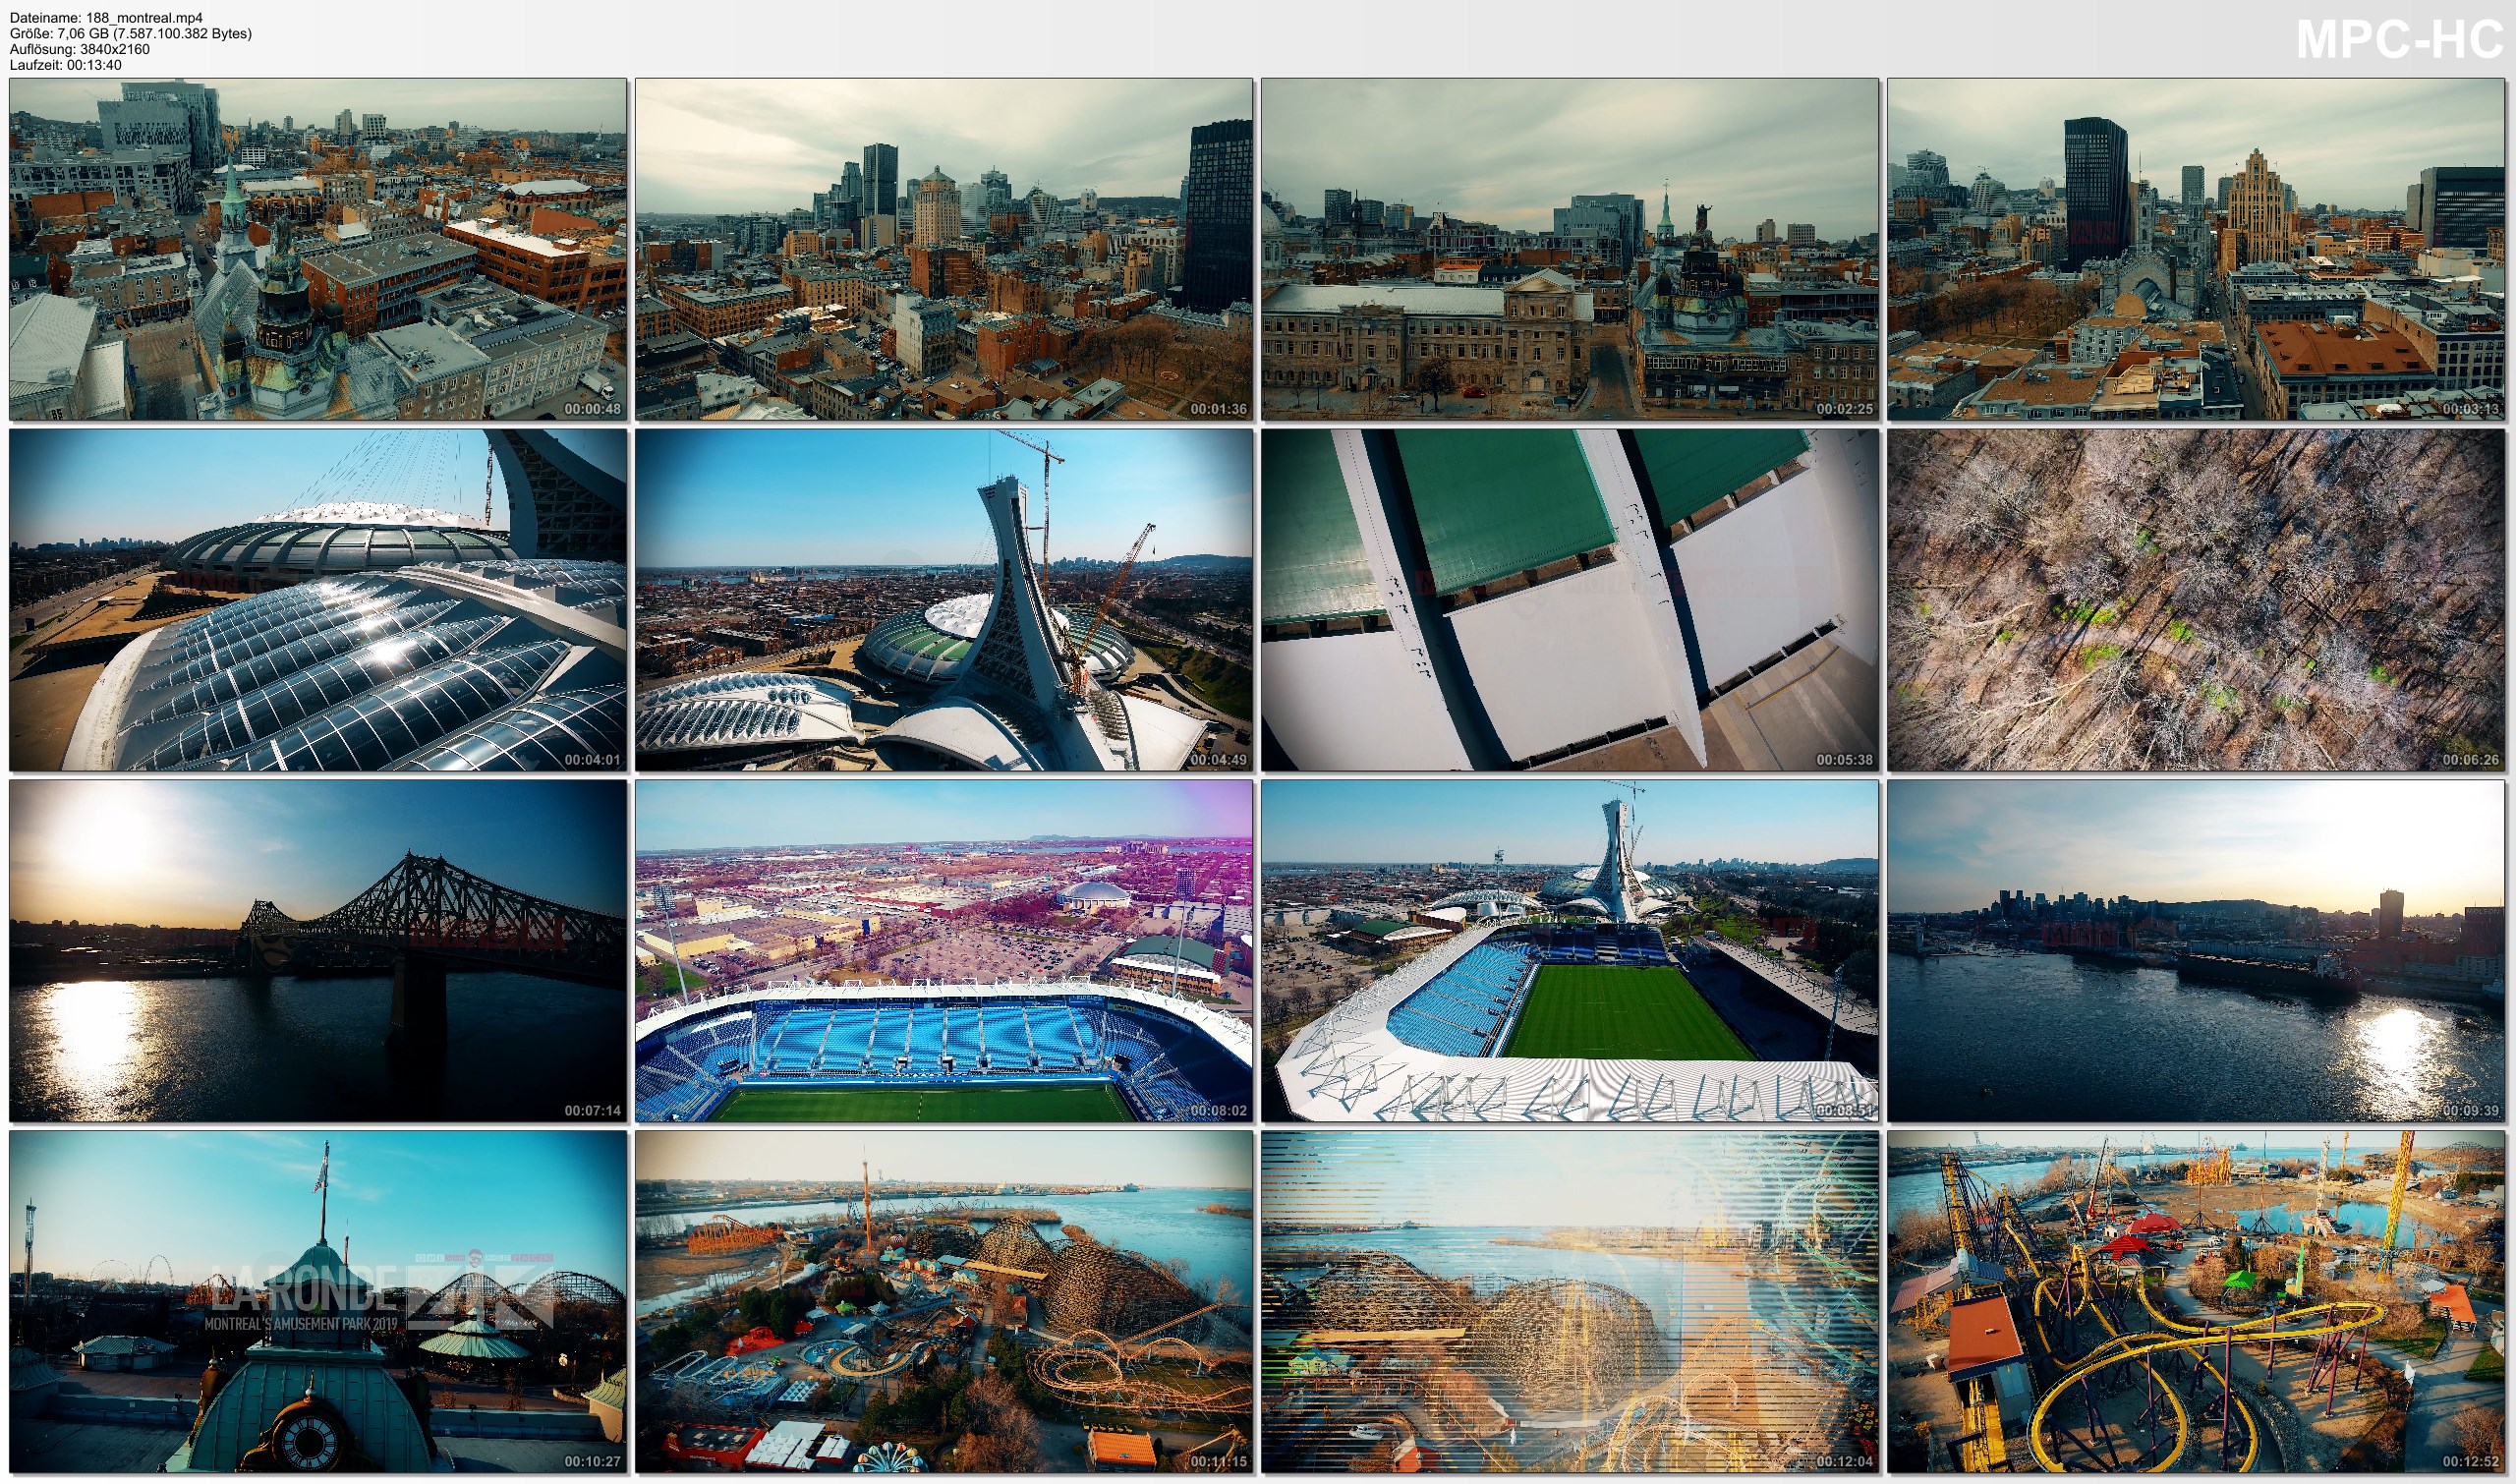 Drone Pictures from Video 【4K】Drone Footage | MONTREAL 2019 ..:: The City of Saints | Downtown · Olympic Park · Stade Saputo